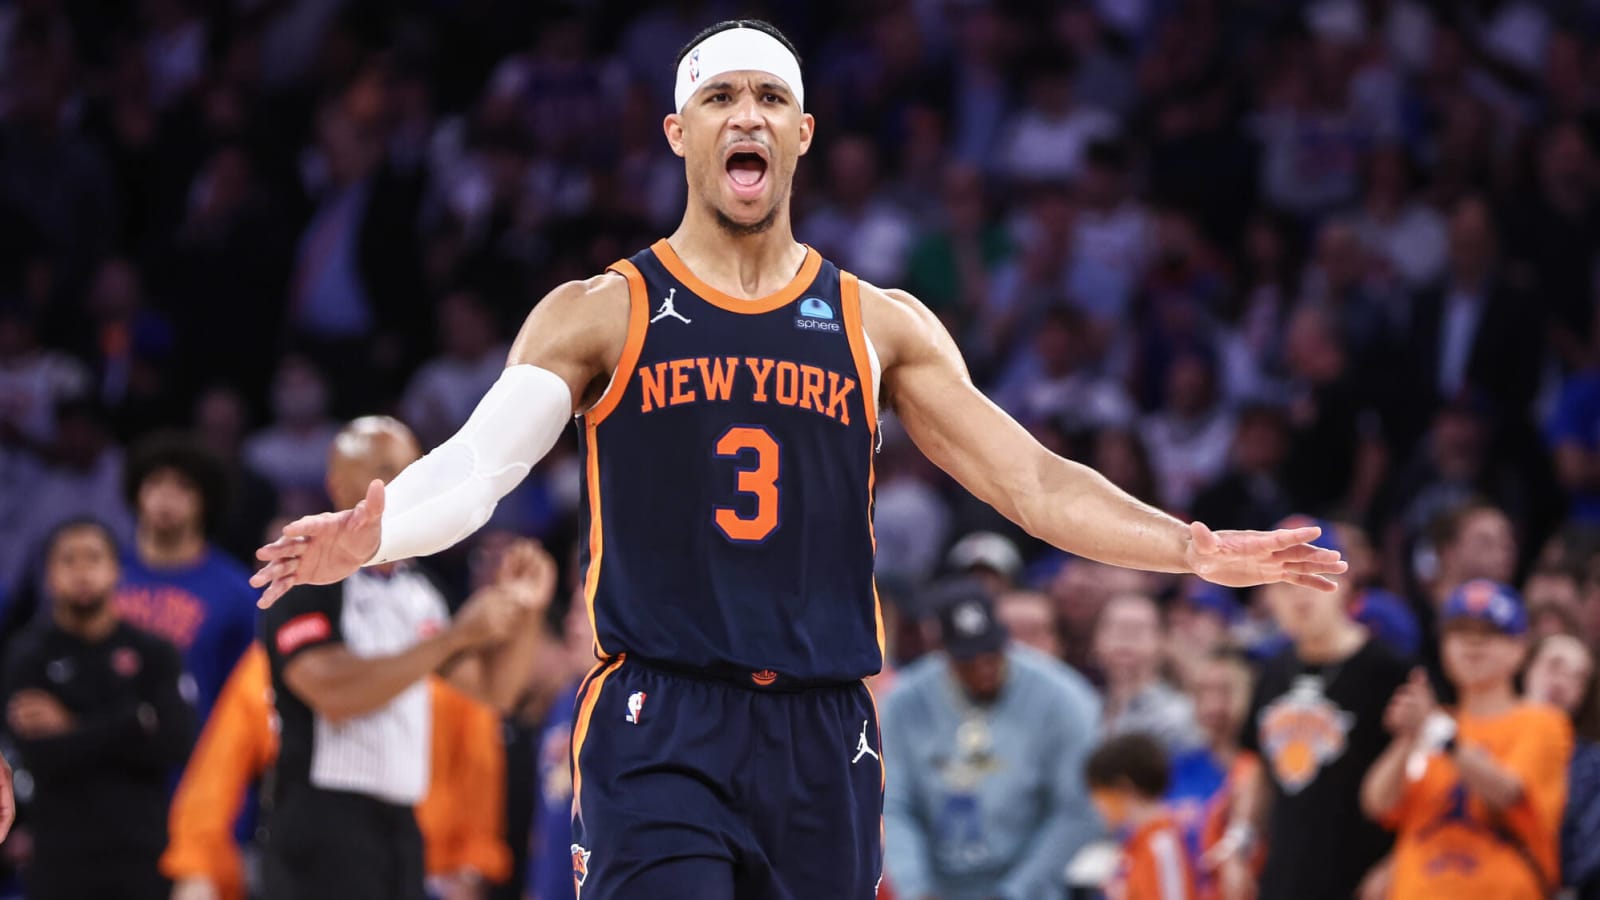 Knicks’ Josh Hart suffers worst playoff performance in Game 4 vs. Pacers after historic Game 3